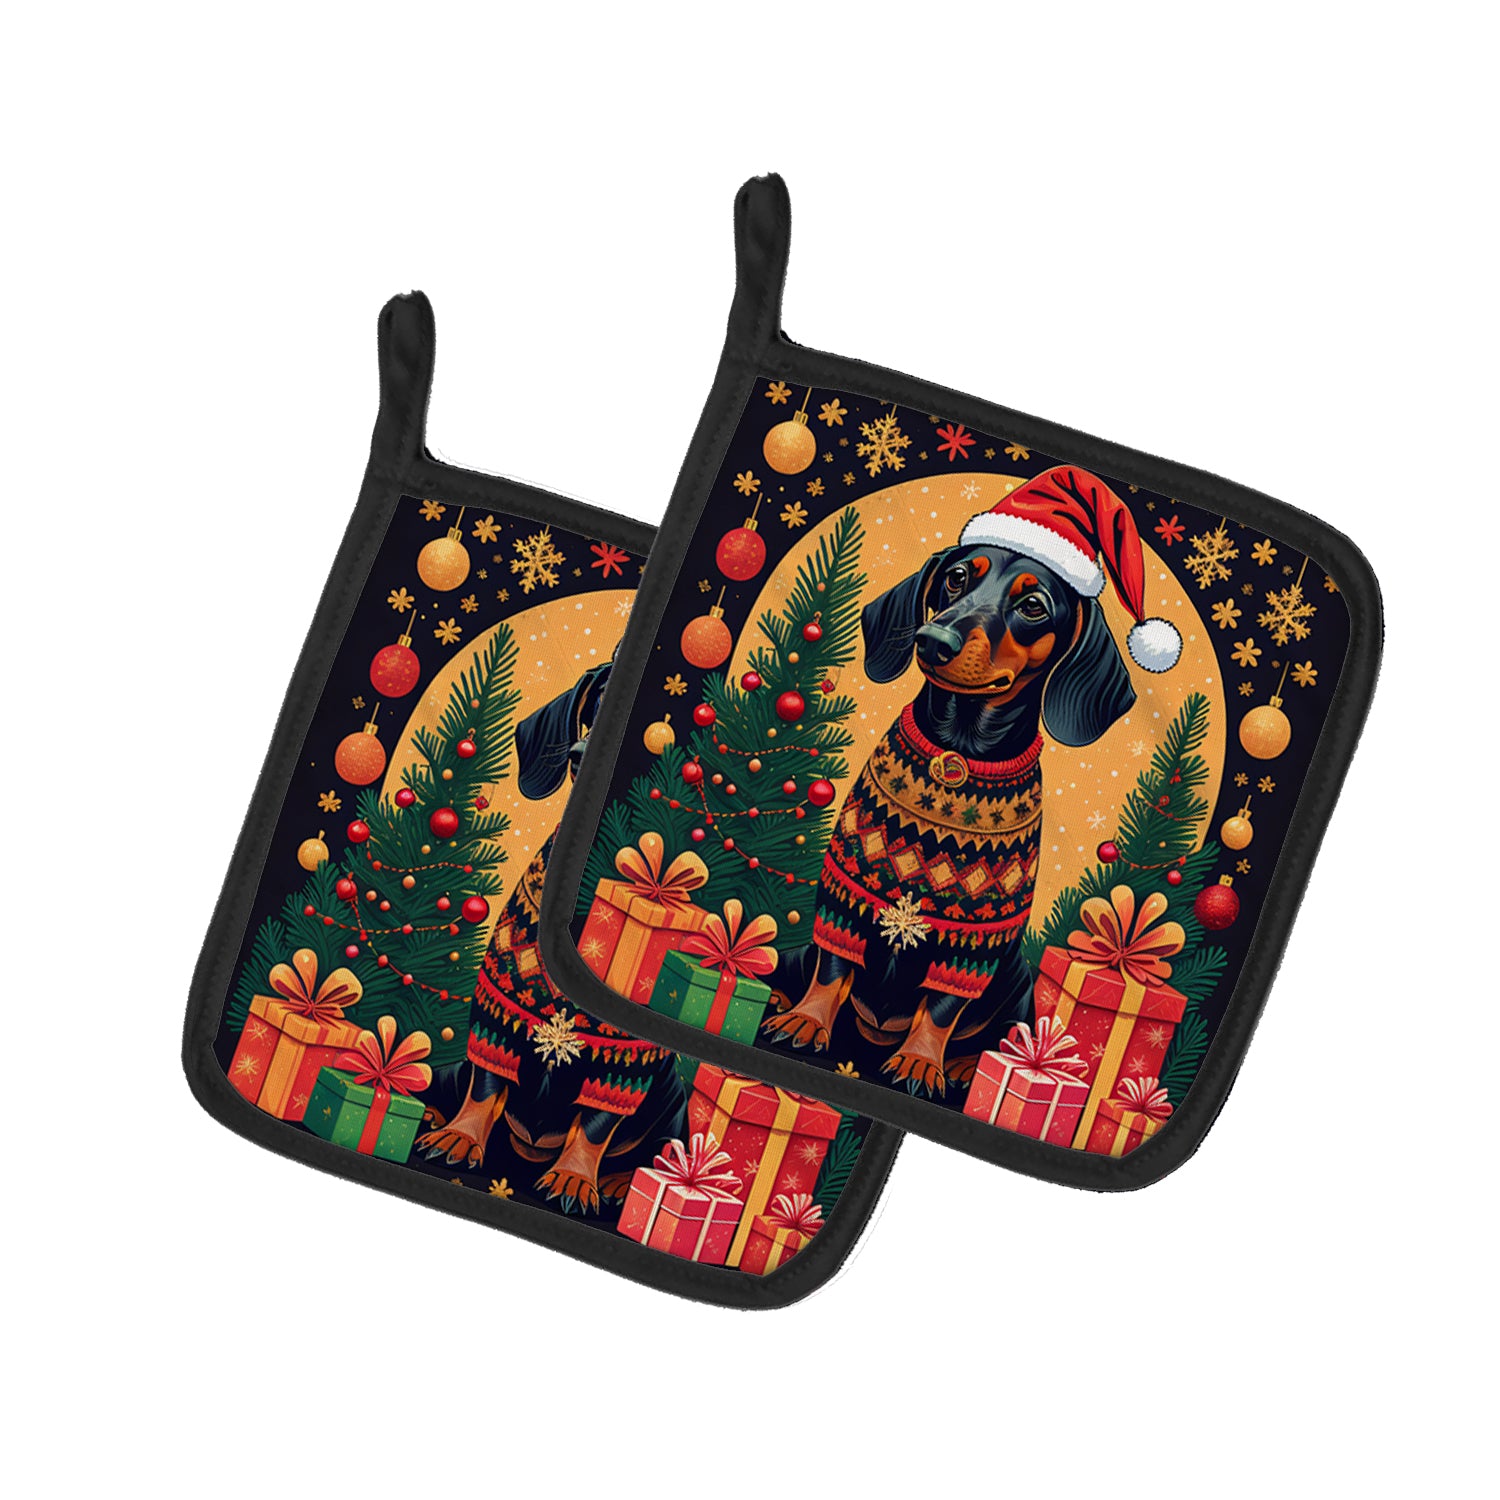 Buy this Black and Tan Dachshund Christmas Pair of Pot Holders